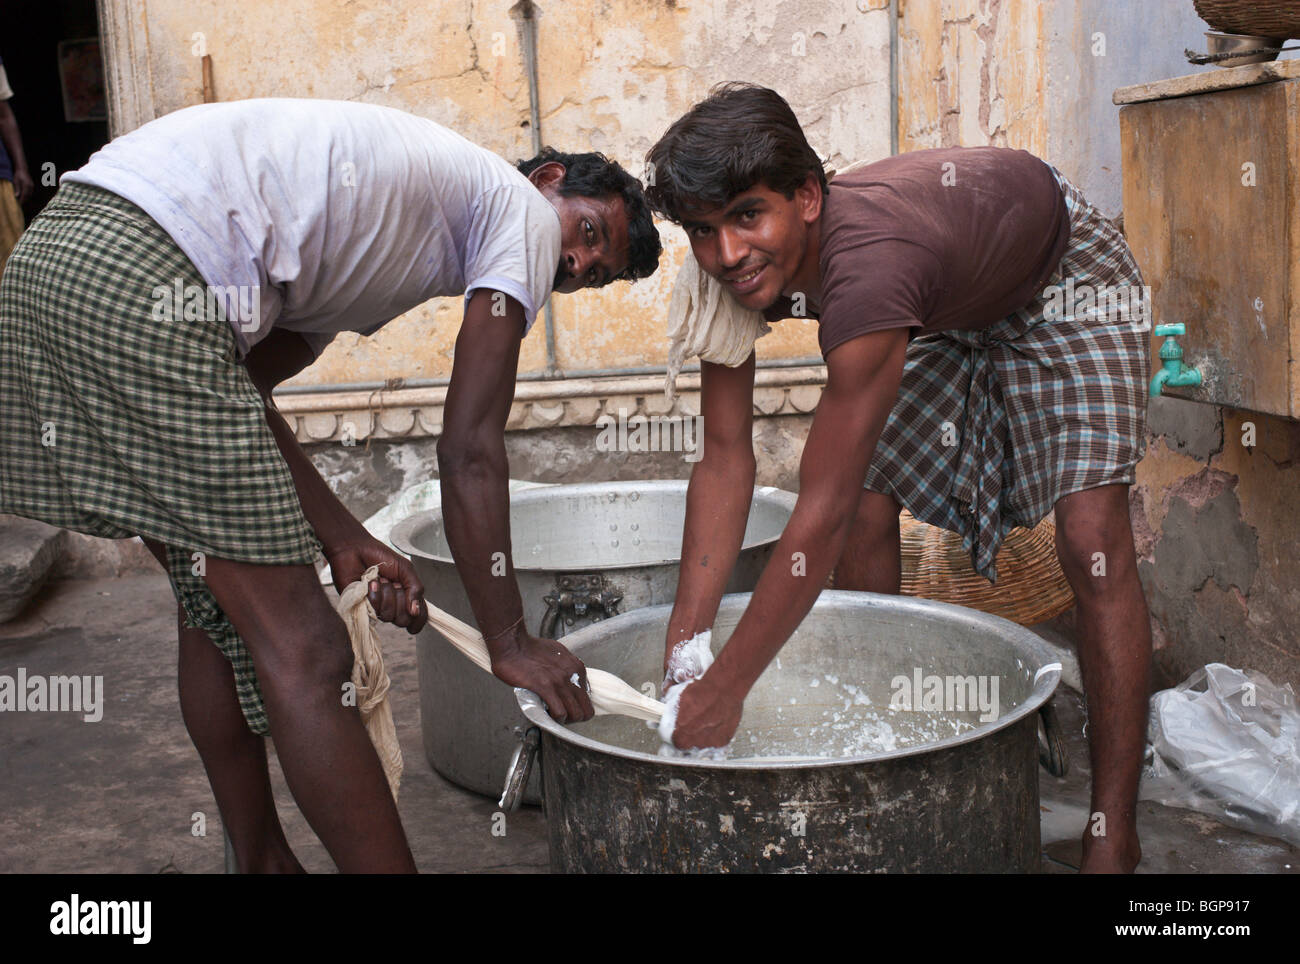 Two men preparing milk solids for cooking in a Hindu temple for charity, Jaipur, India. Stock Photo